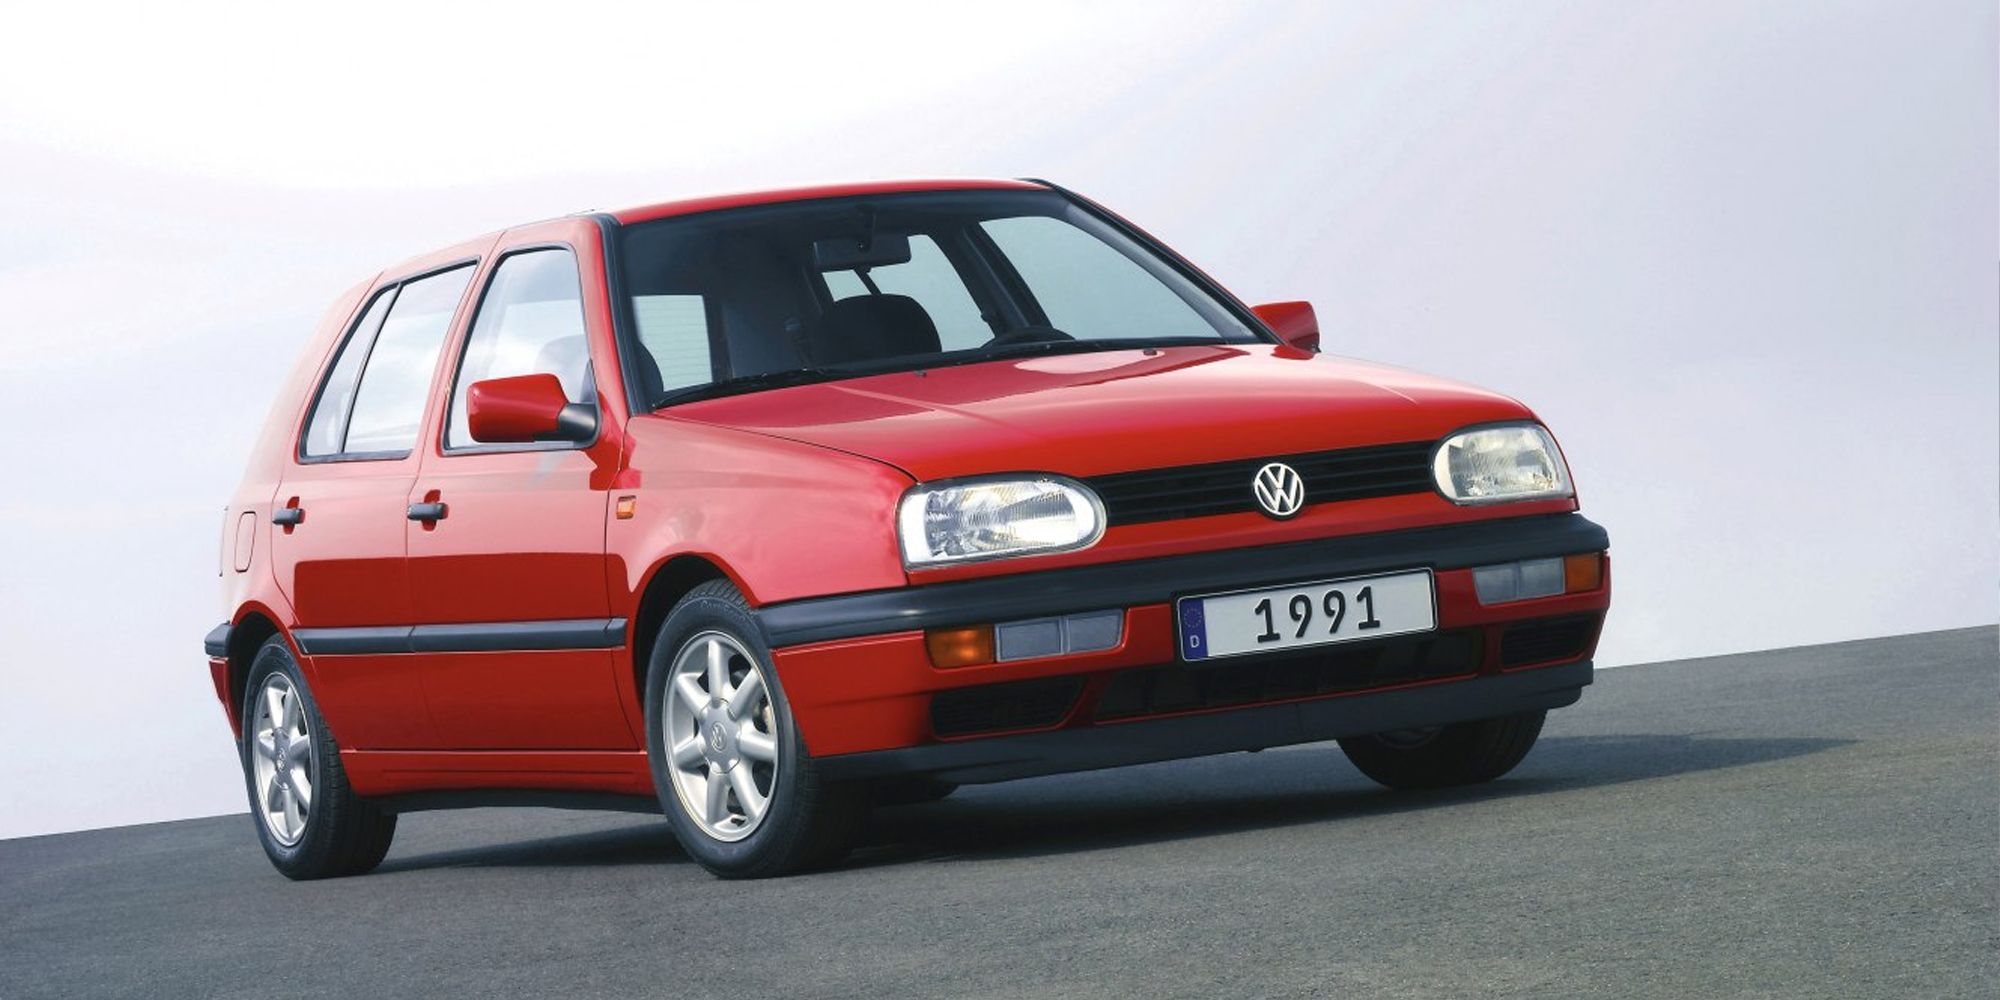 The front of the Golf VR6